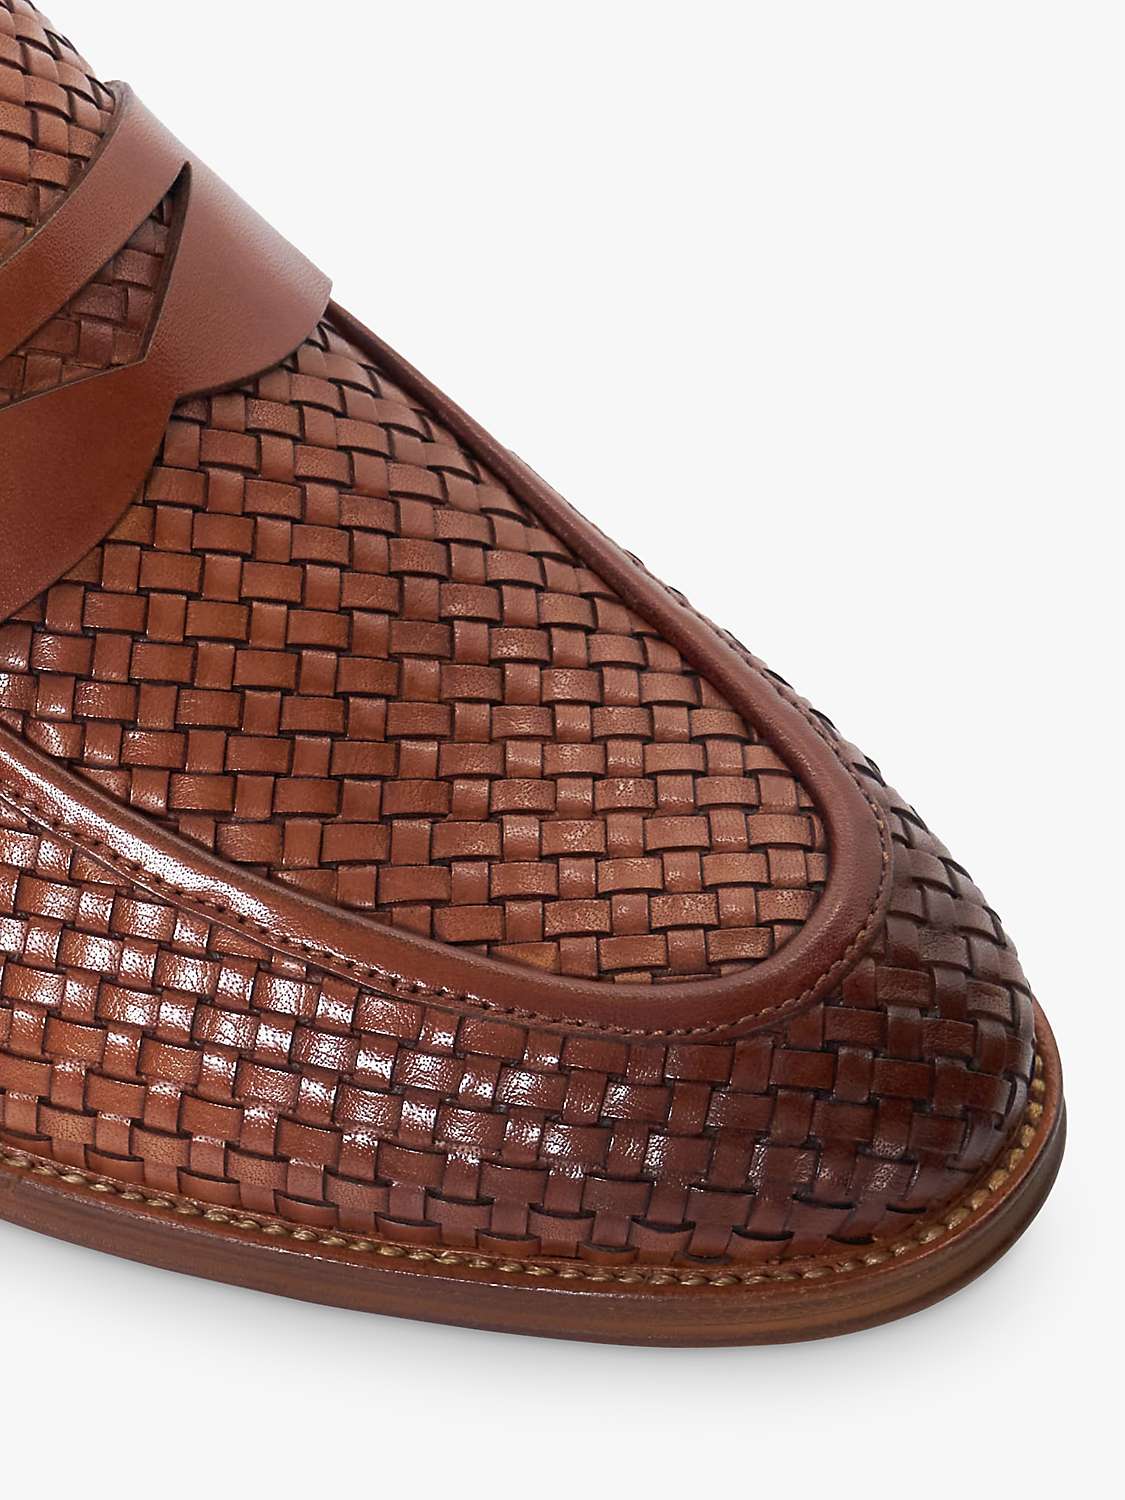 Buy Dune Saharas Leather Penny Loafers Online at johnlewis.com